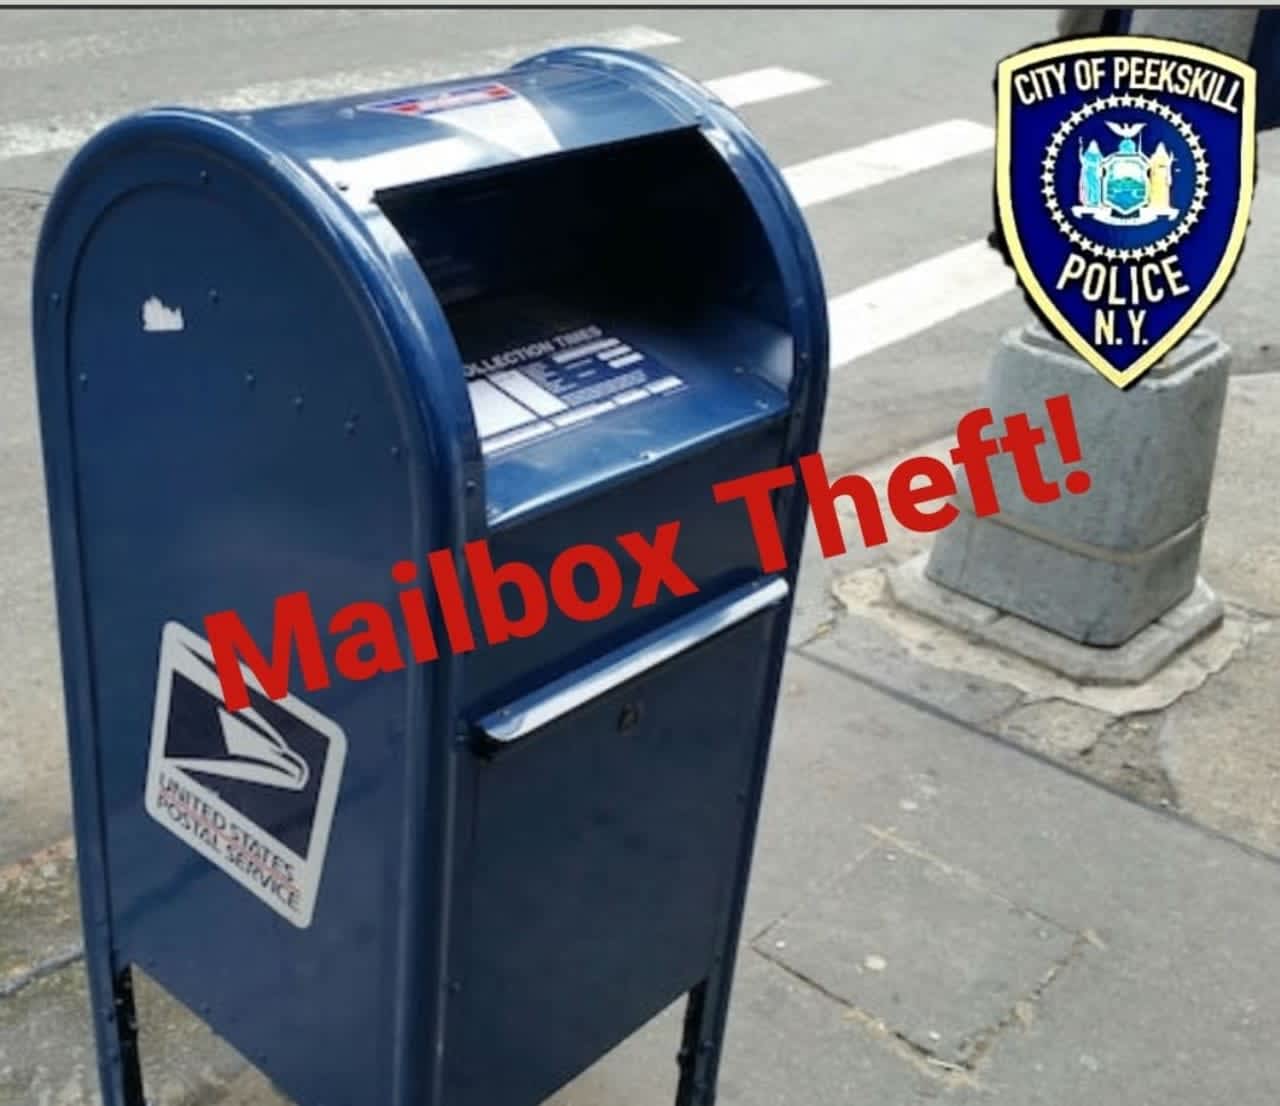 The Peekskill Police Department is investigating after checks were stolen from a US Postal Service mailbox.